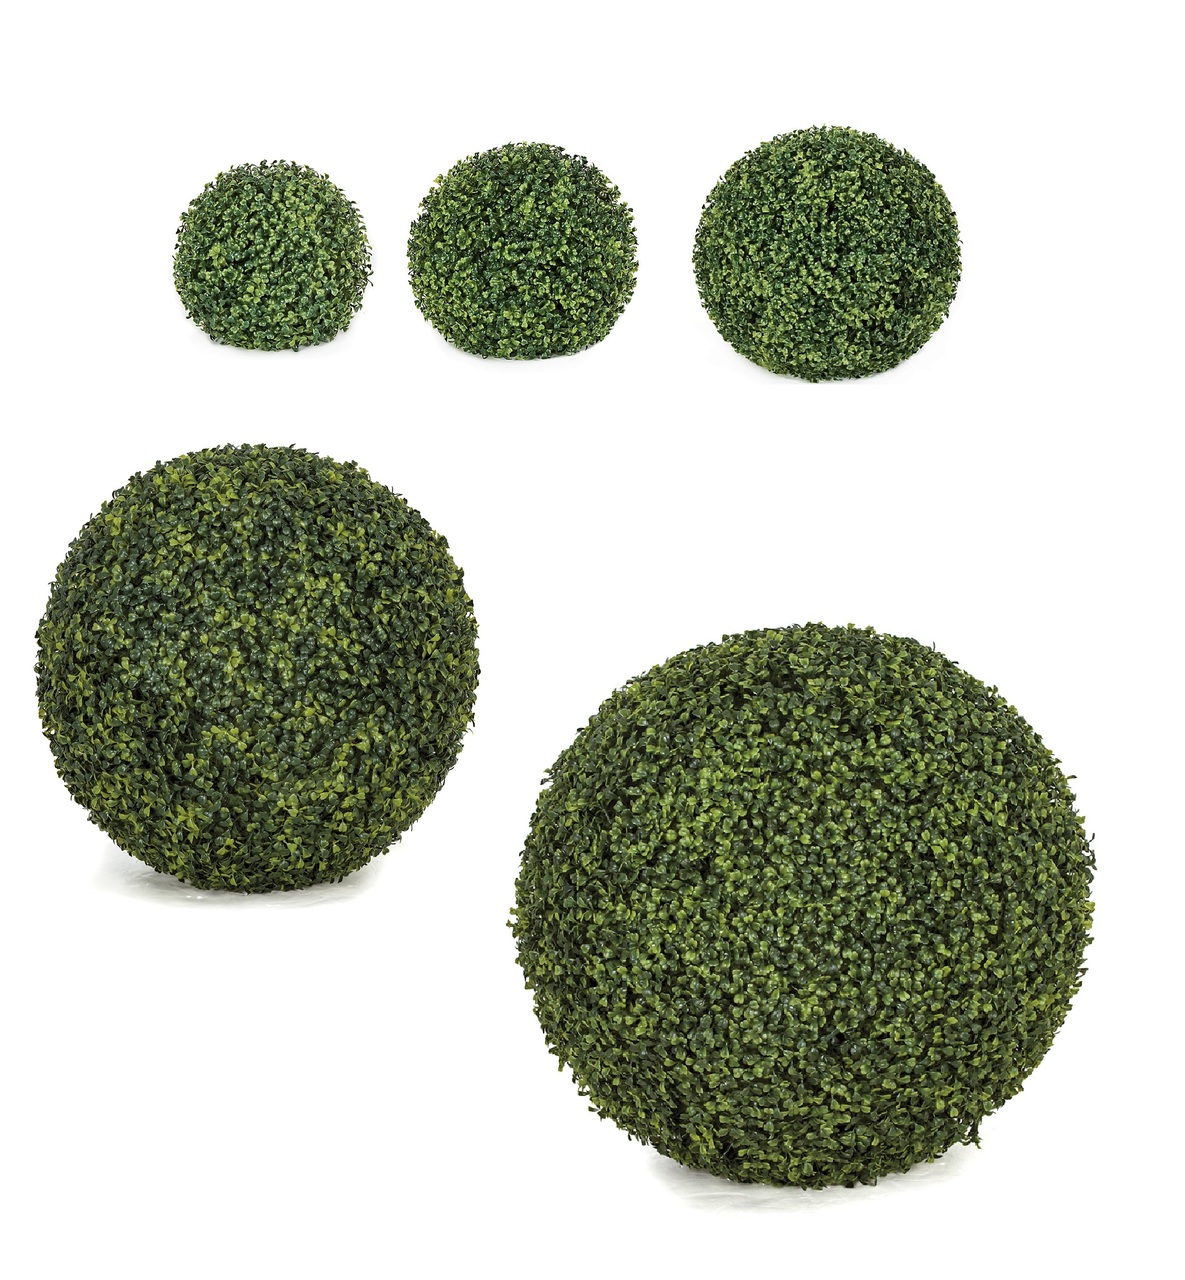 Outdoor 10 inch Diameter Traditional or American Boxwood Ball